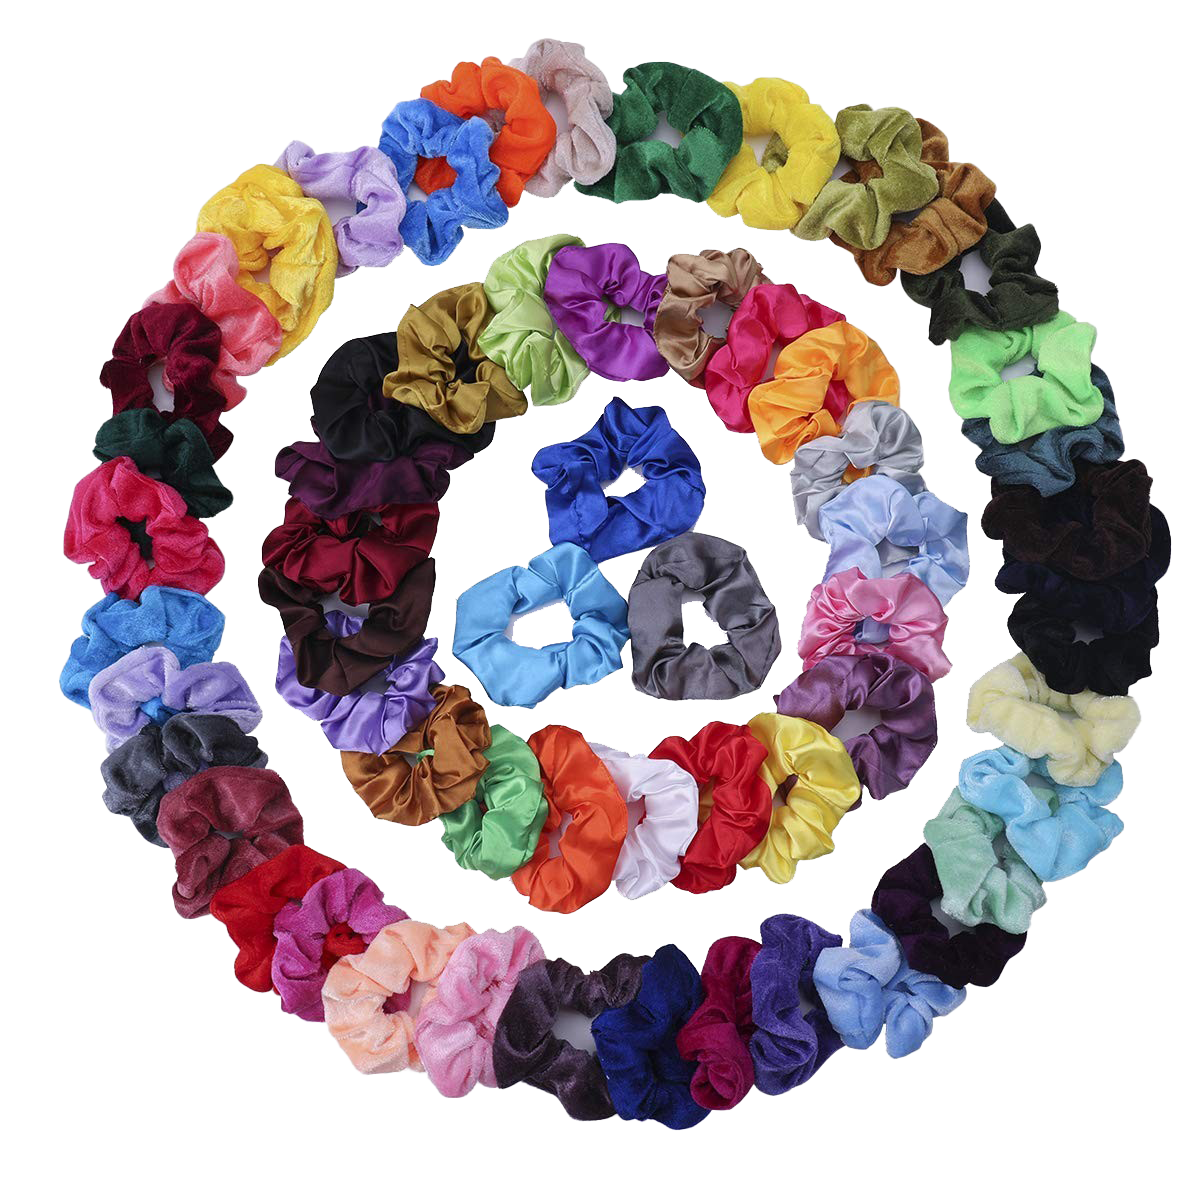 Hair For Scrunchies Free Photo PNG Image